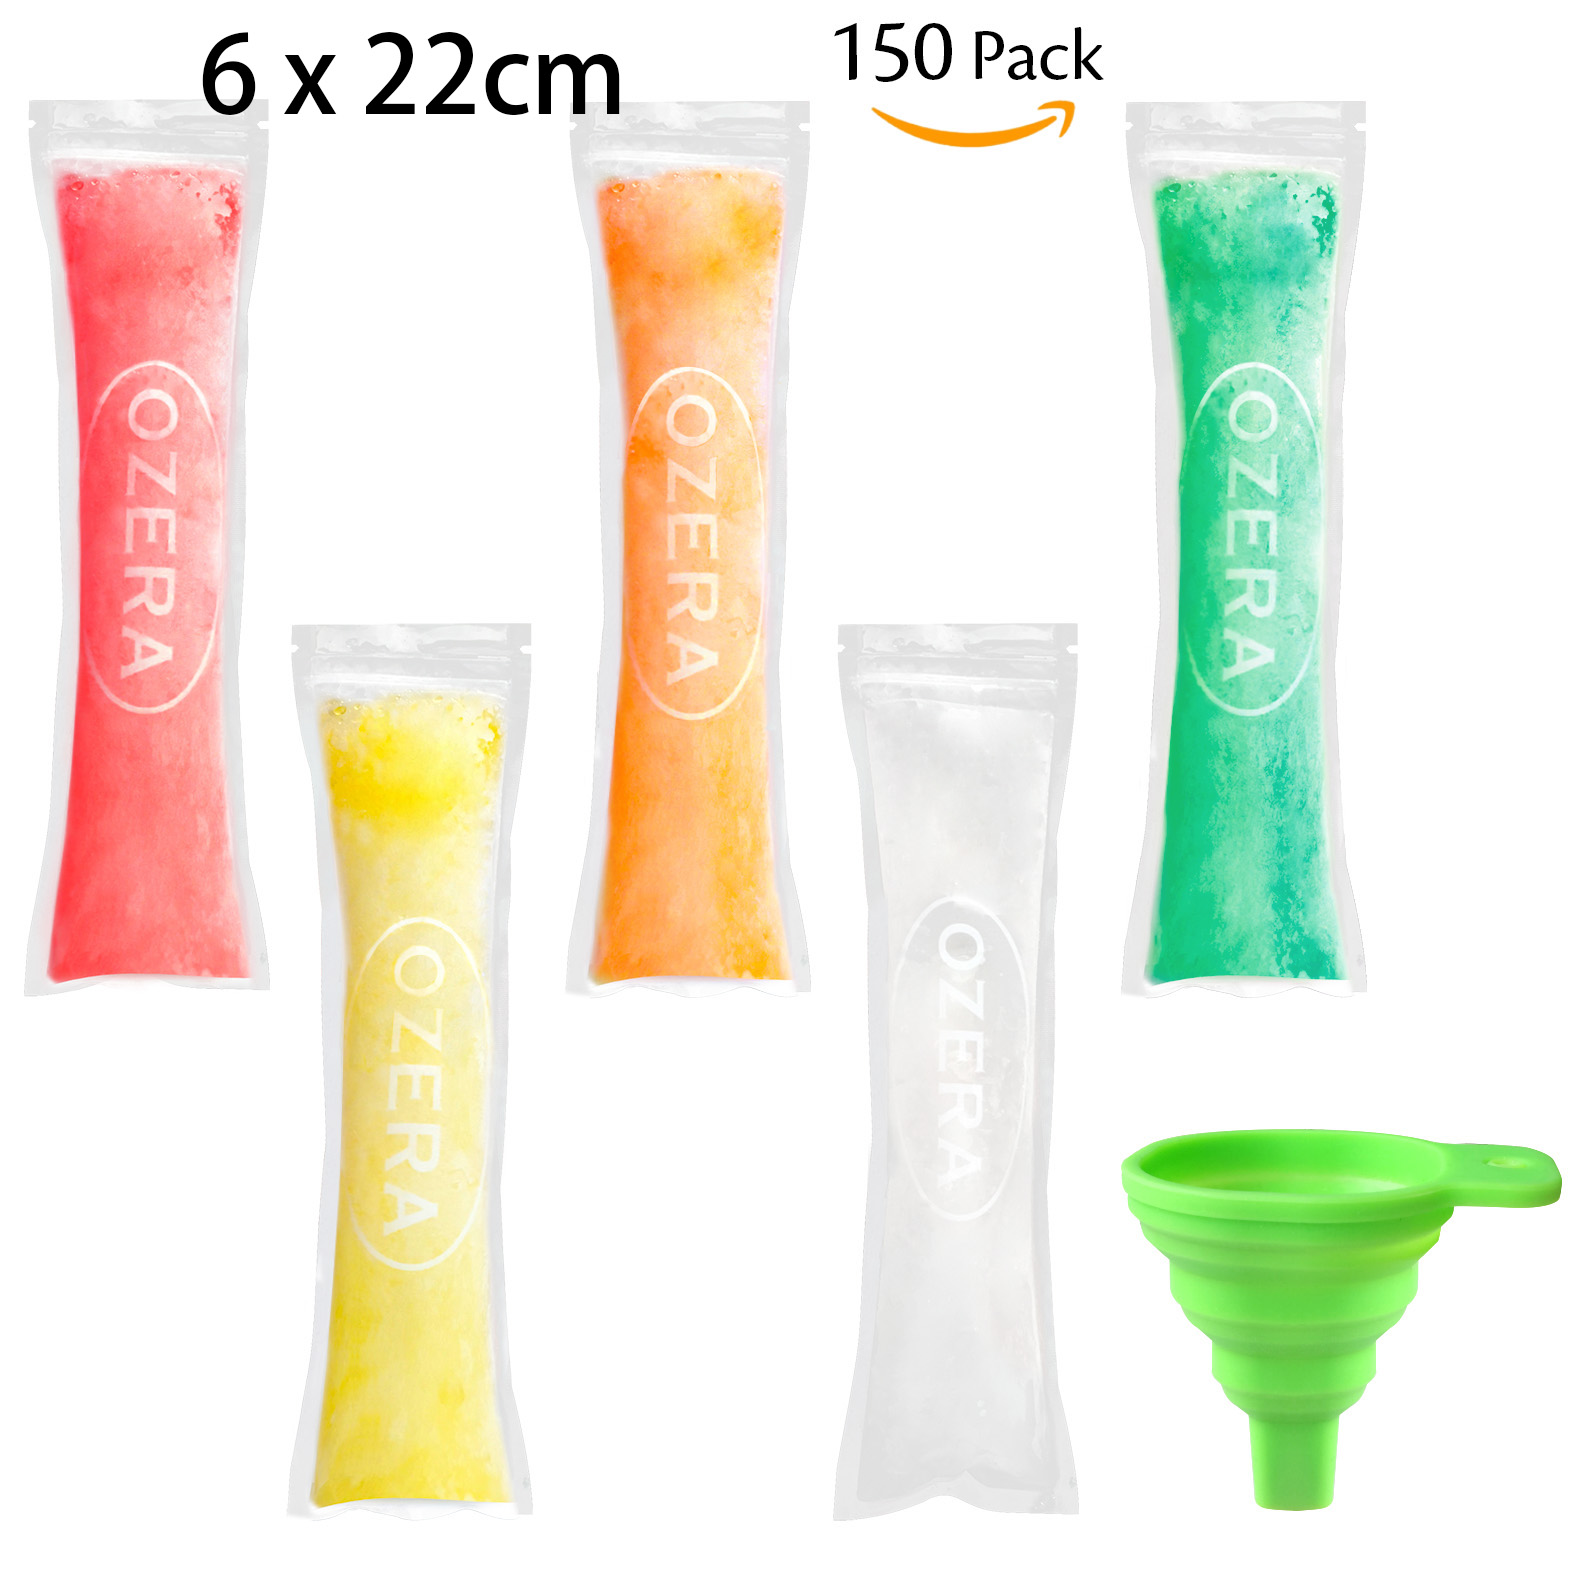 Popsicle Ice Pop Maker Molds 6 Pack Green BPA Free Ice Popsicles